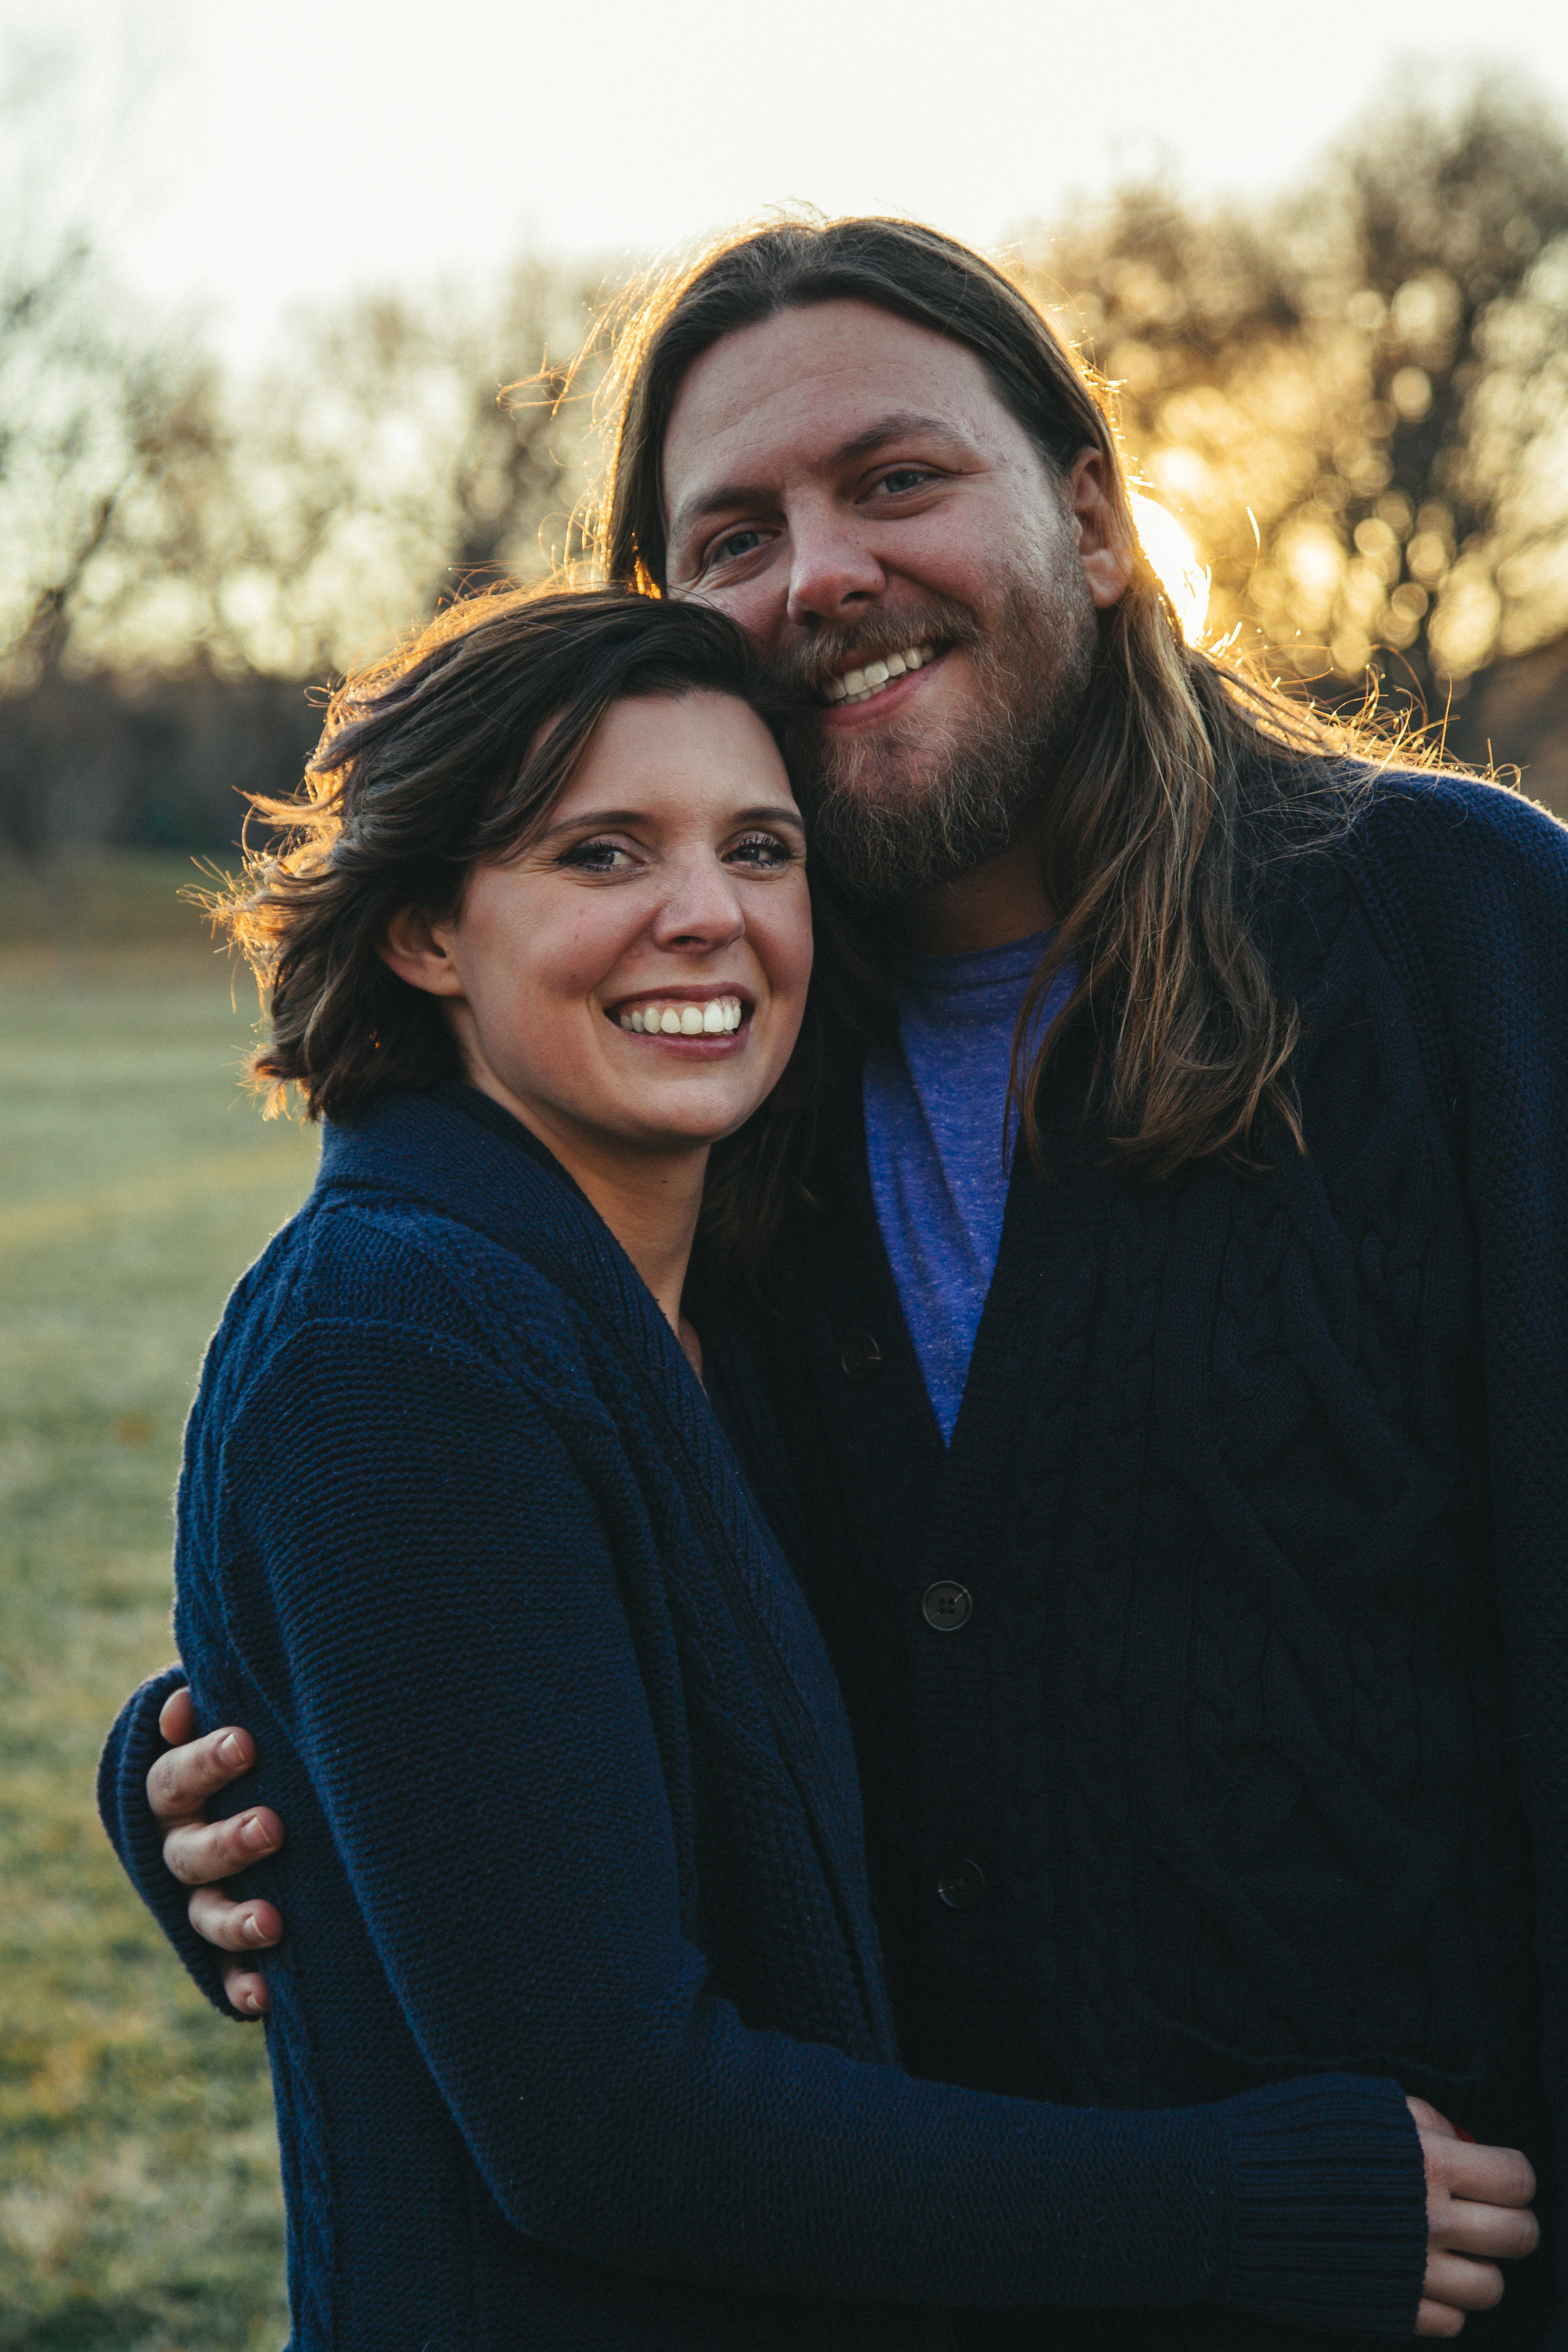 Tom + Kailey Engagements (14 of 24).jpg